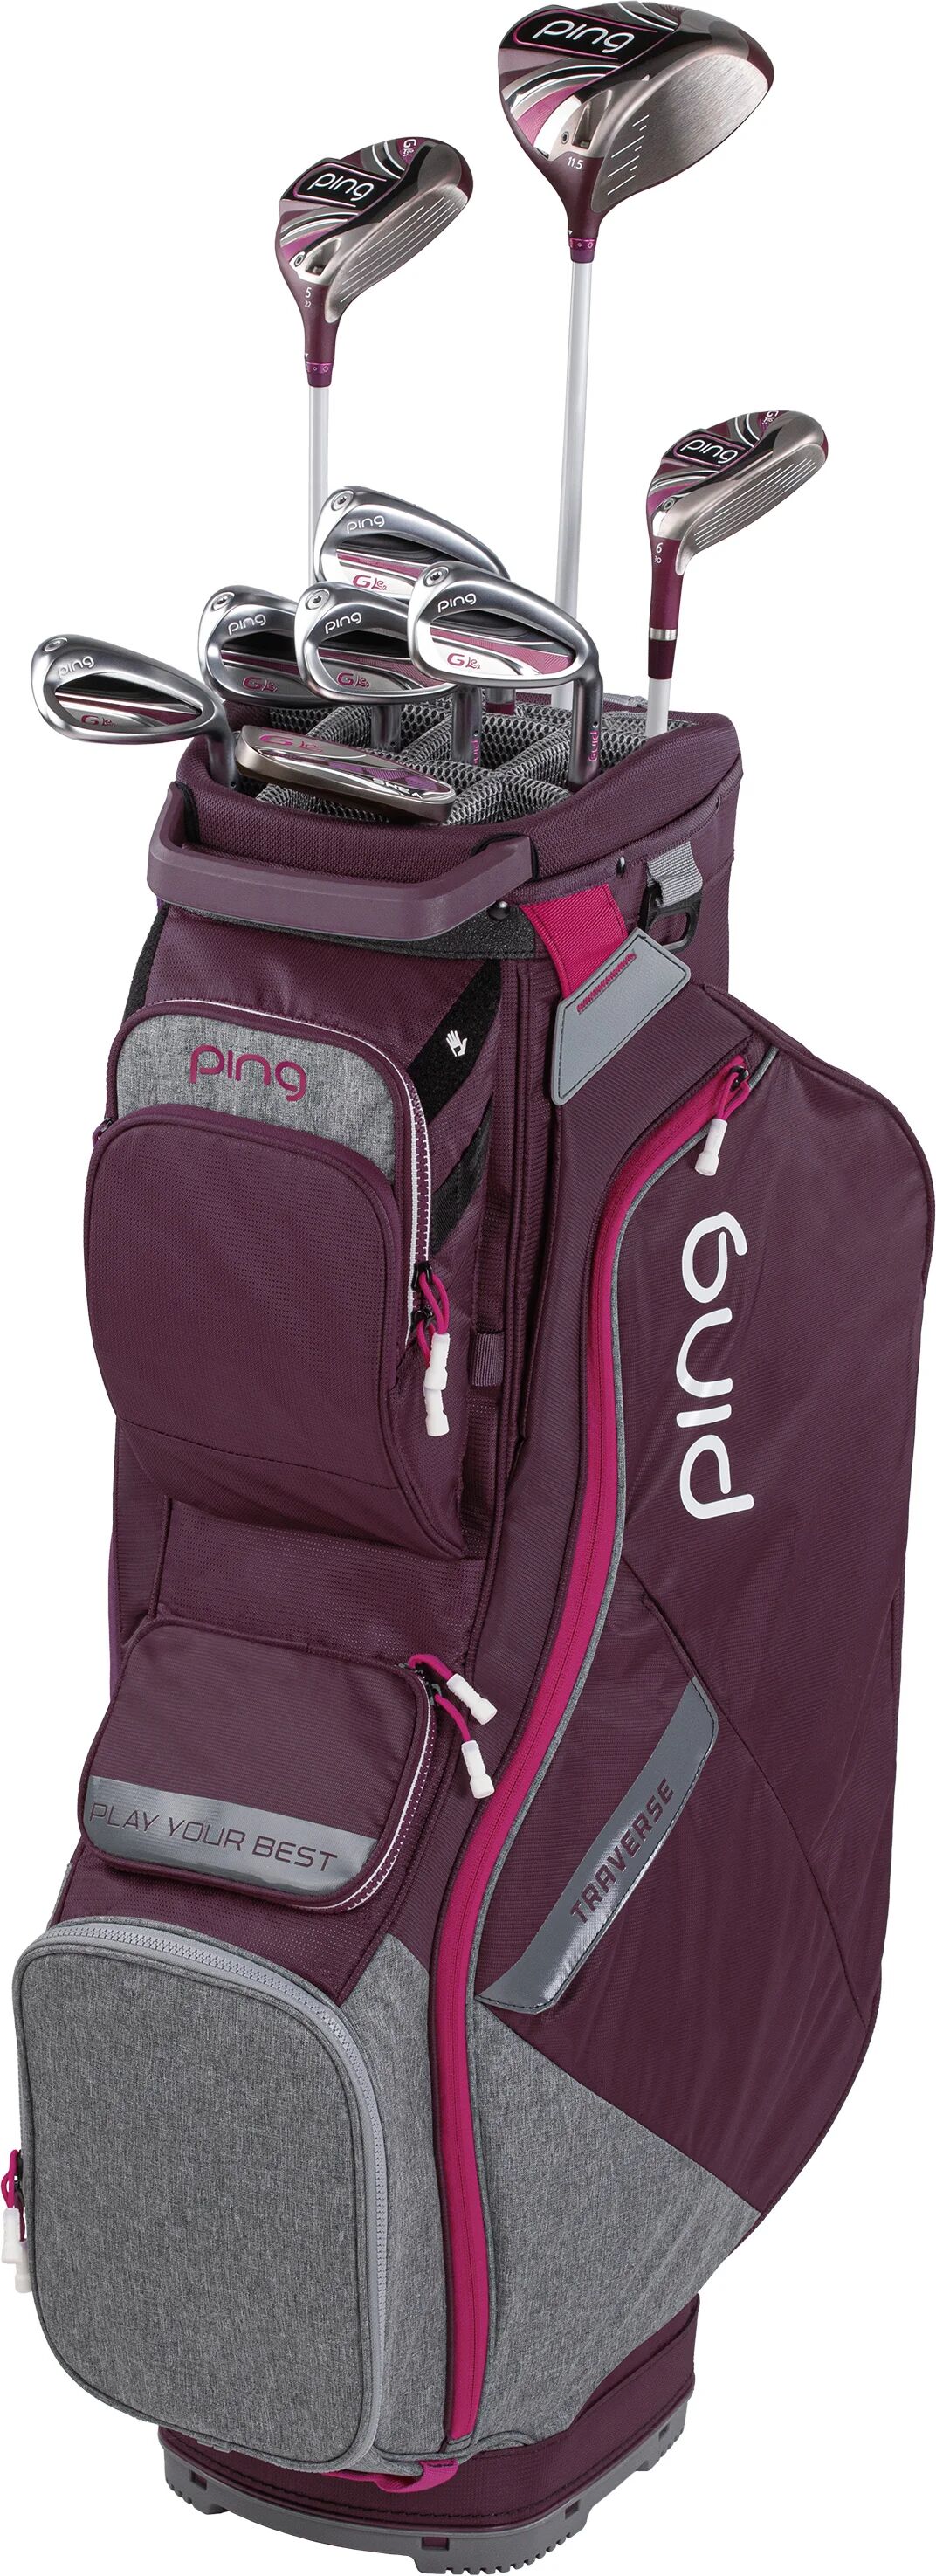 PING Womens G Le2 Complete Golf Package Set - Cart Bag - Cart Bag - RIGHT - STANDARD